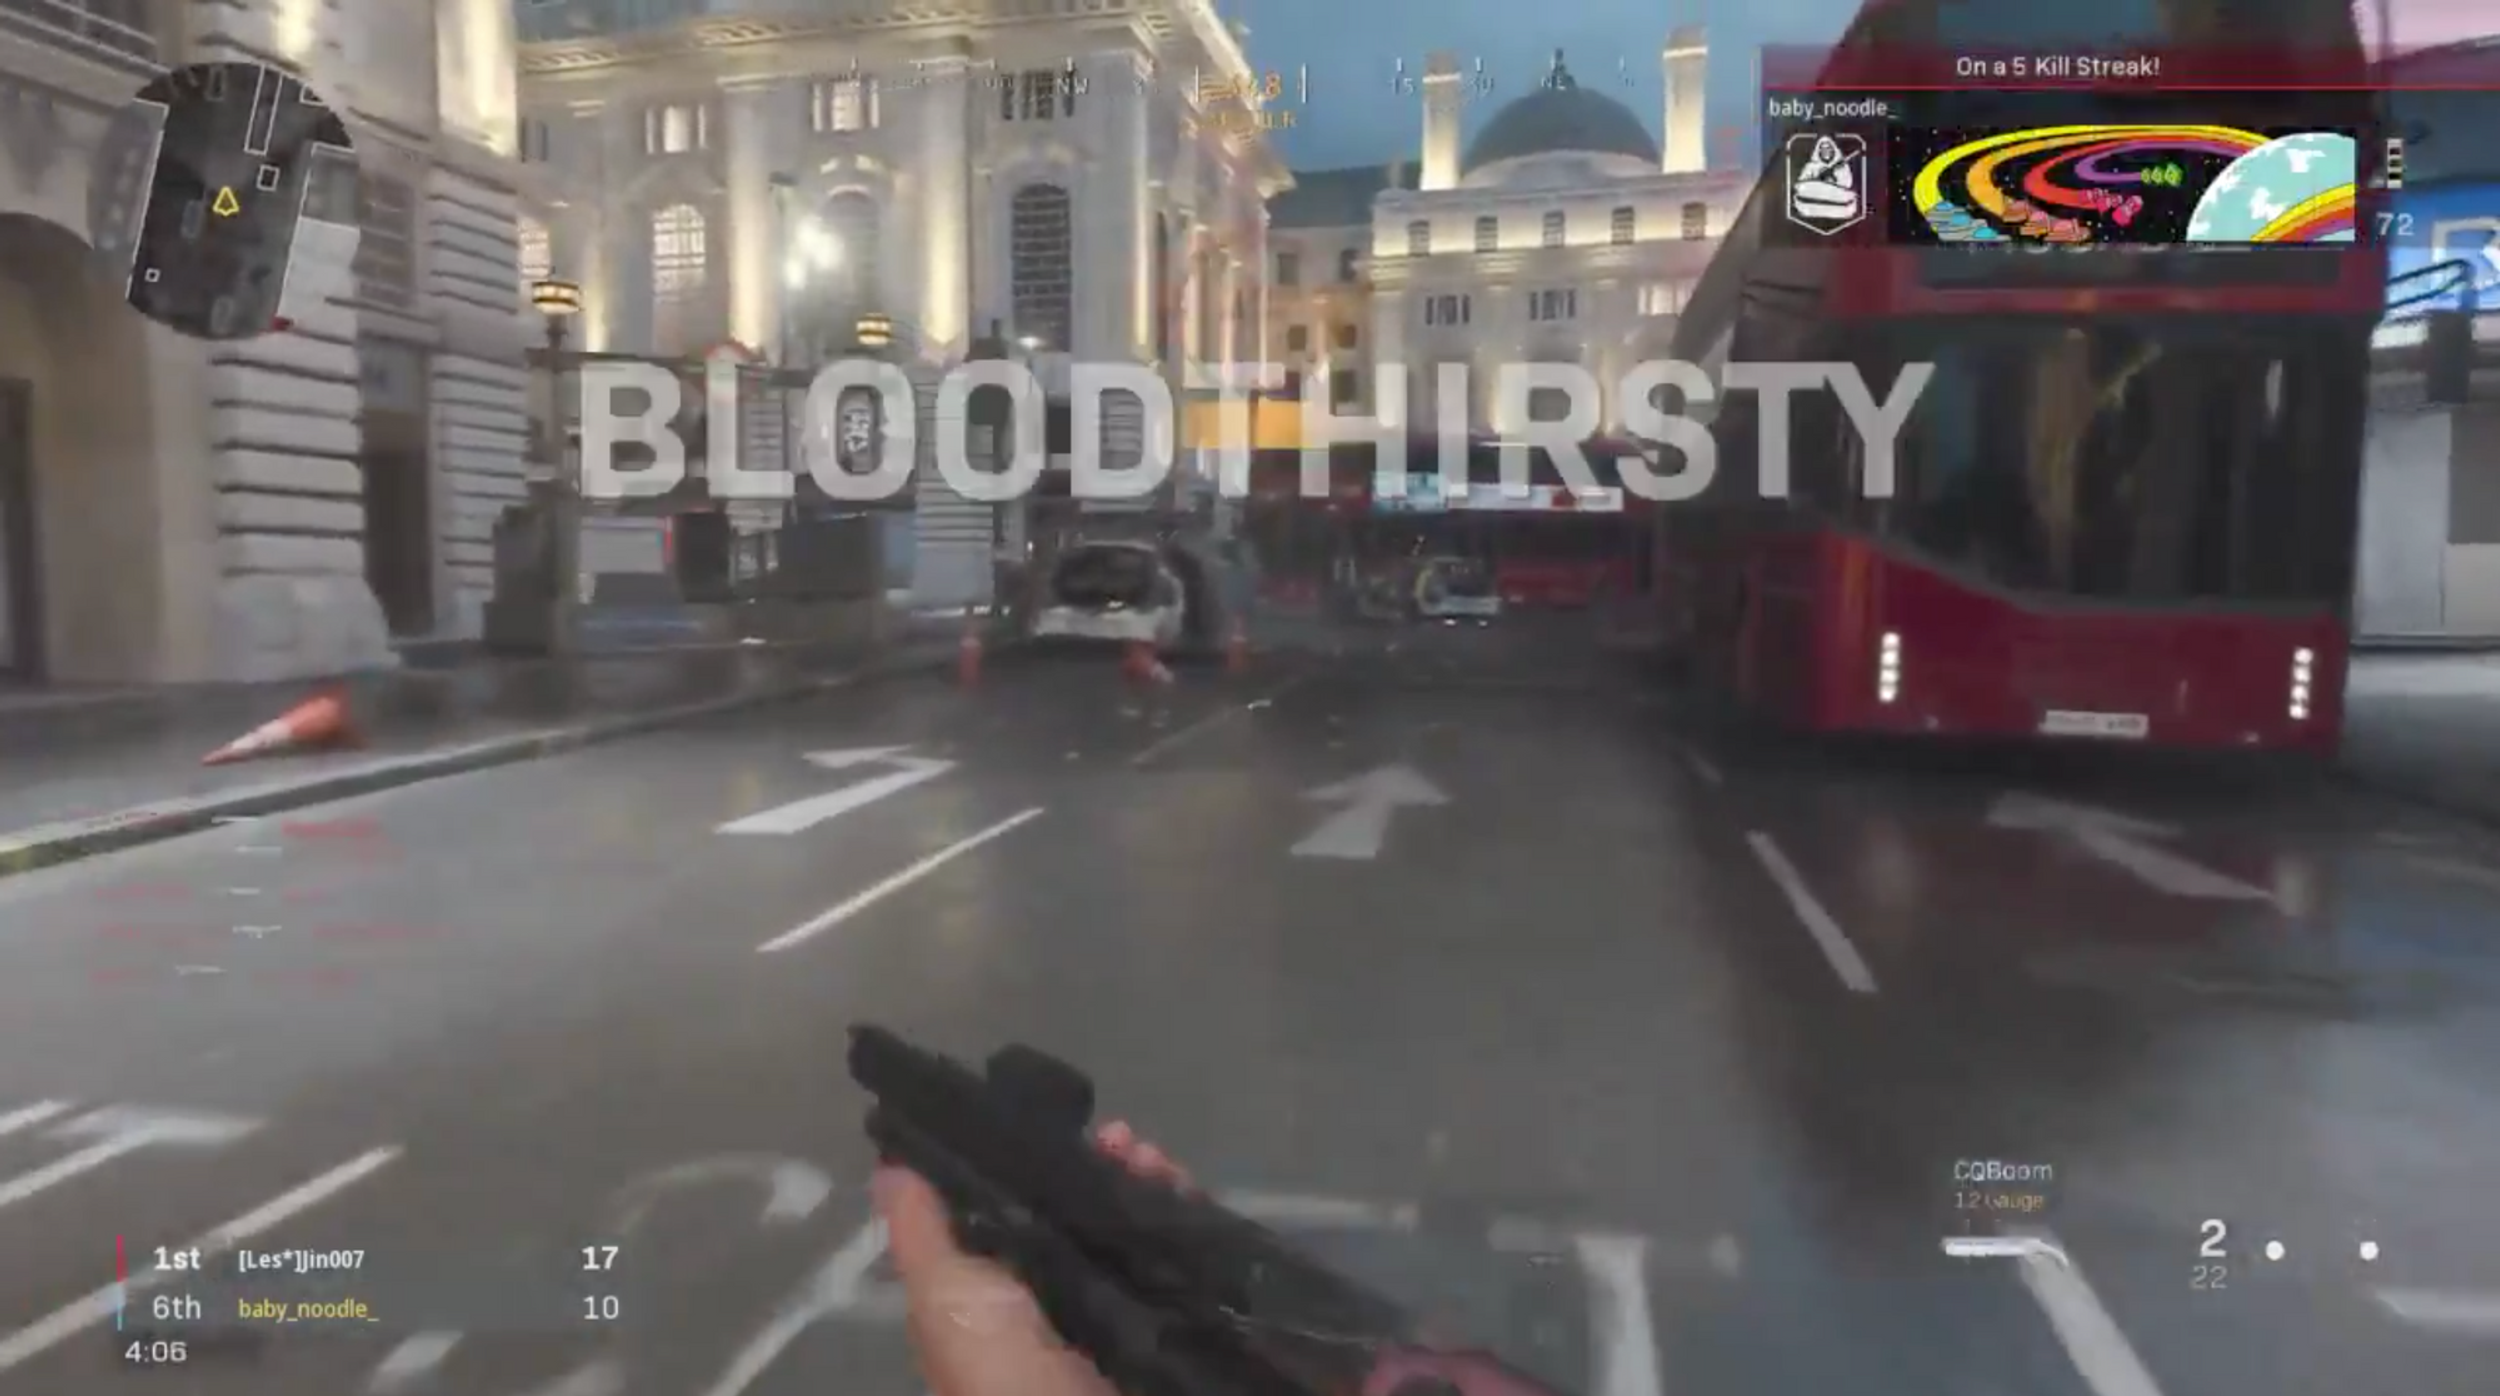 a first person shot holding a gun in a busy Picadilly-looking area with the word BLOODTHIRSTY big across the screen